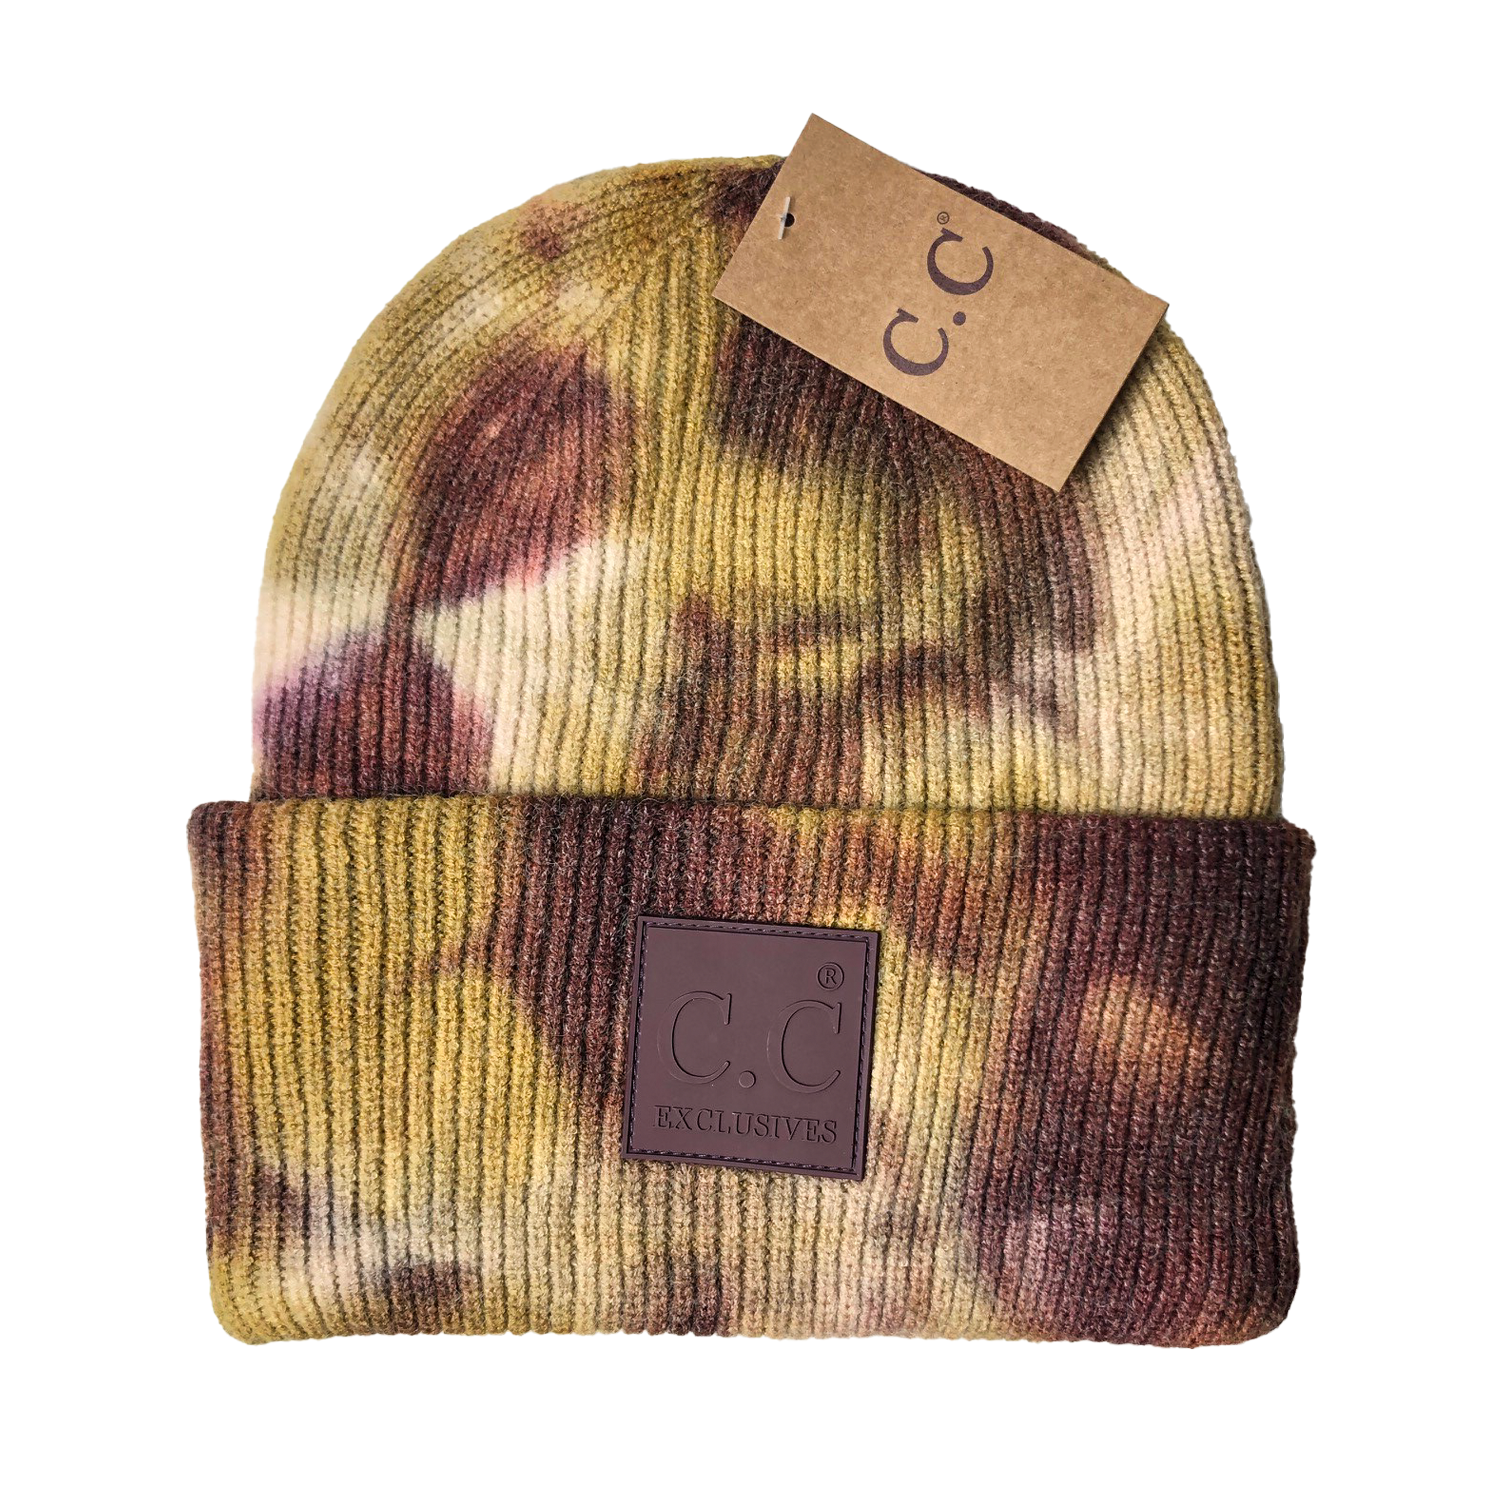 HAT-7380 Tie Dye Beanie with C.C Rubber Patch - Antique Moss/Wild Ginger